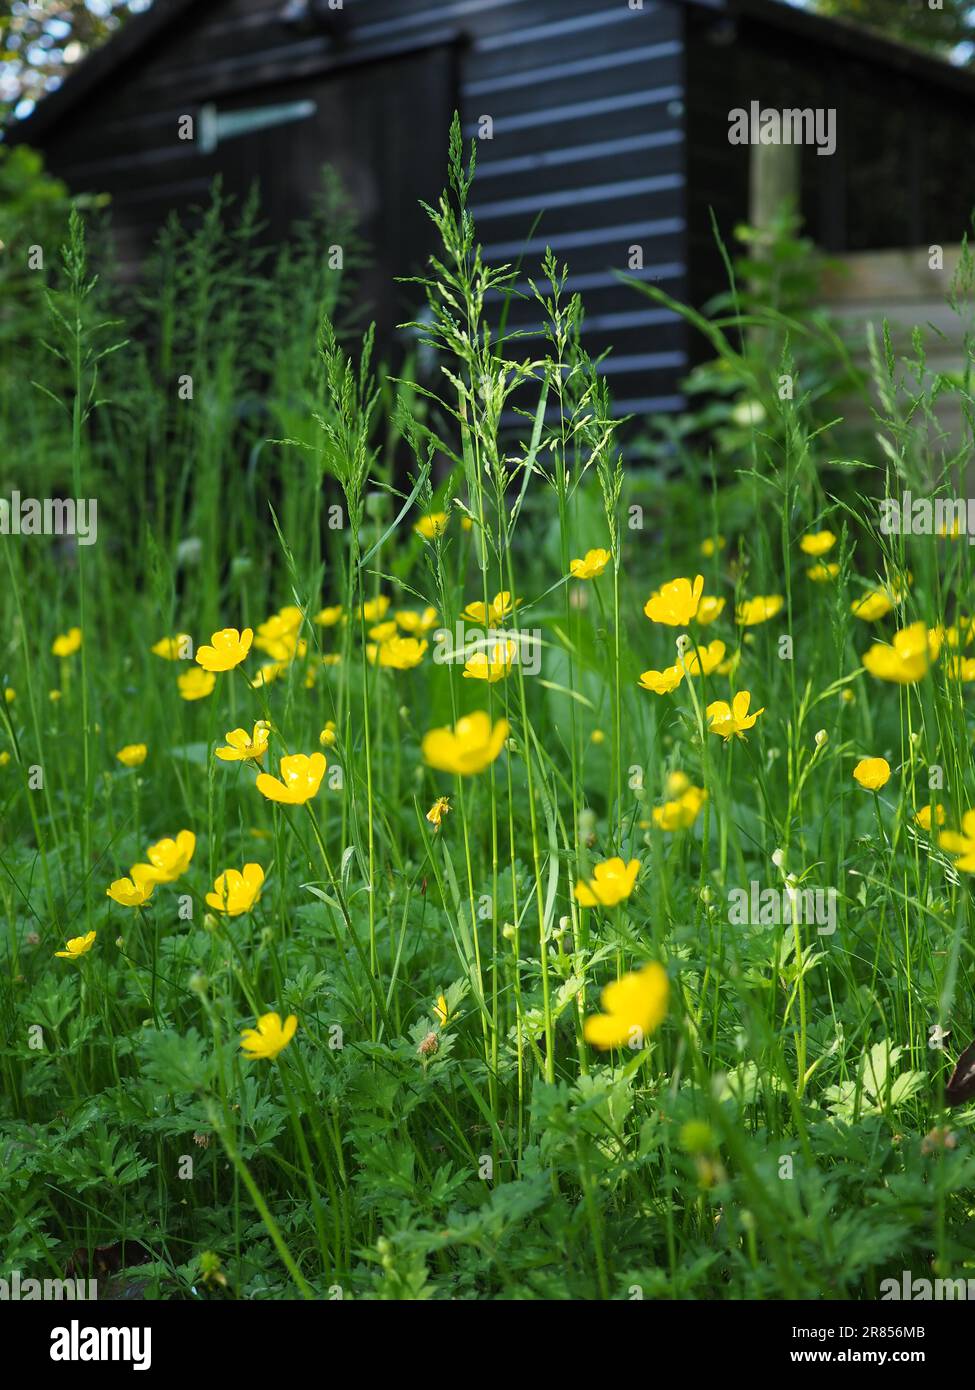 Portrait image of a wild patch of creeping buttercups (ranunculus repens) in a garden in Britain during No Mow May Stock Photo